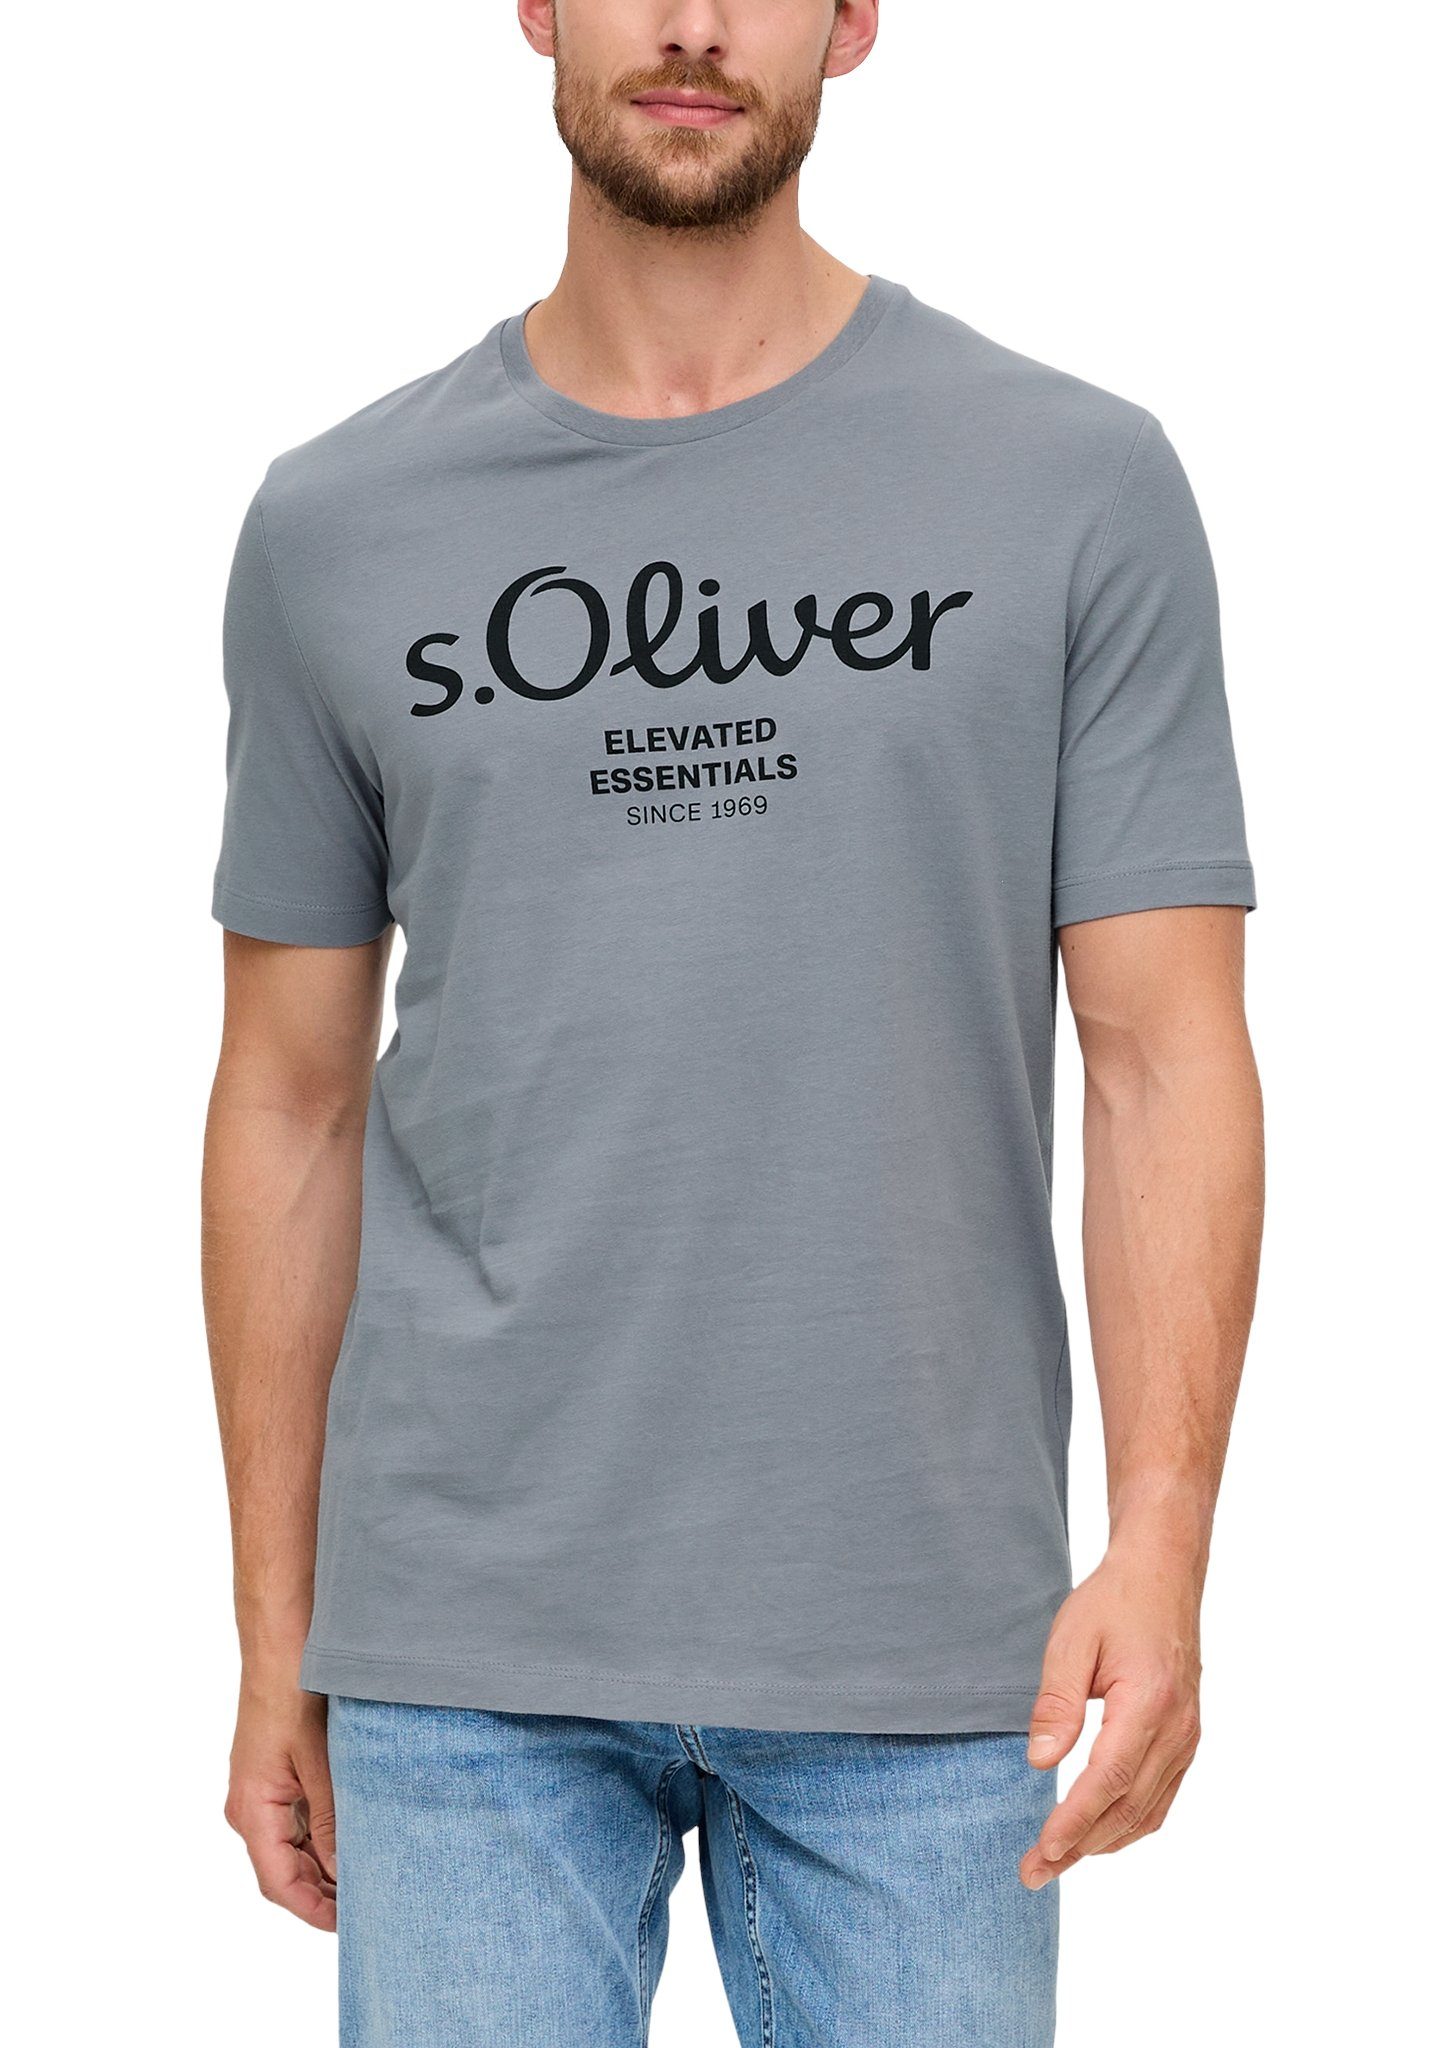 s.Oliver T-Shirt im sportiven Look mid grey